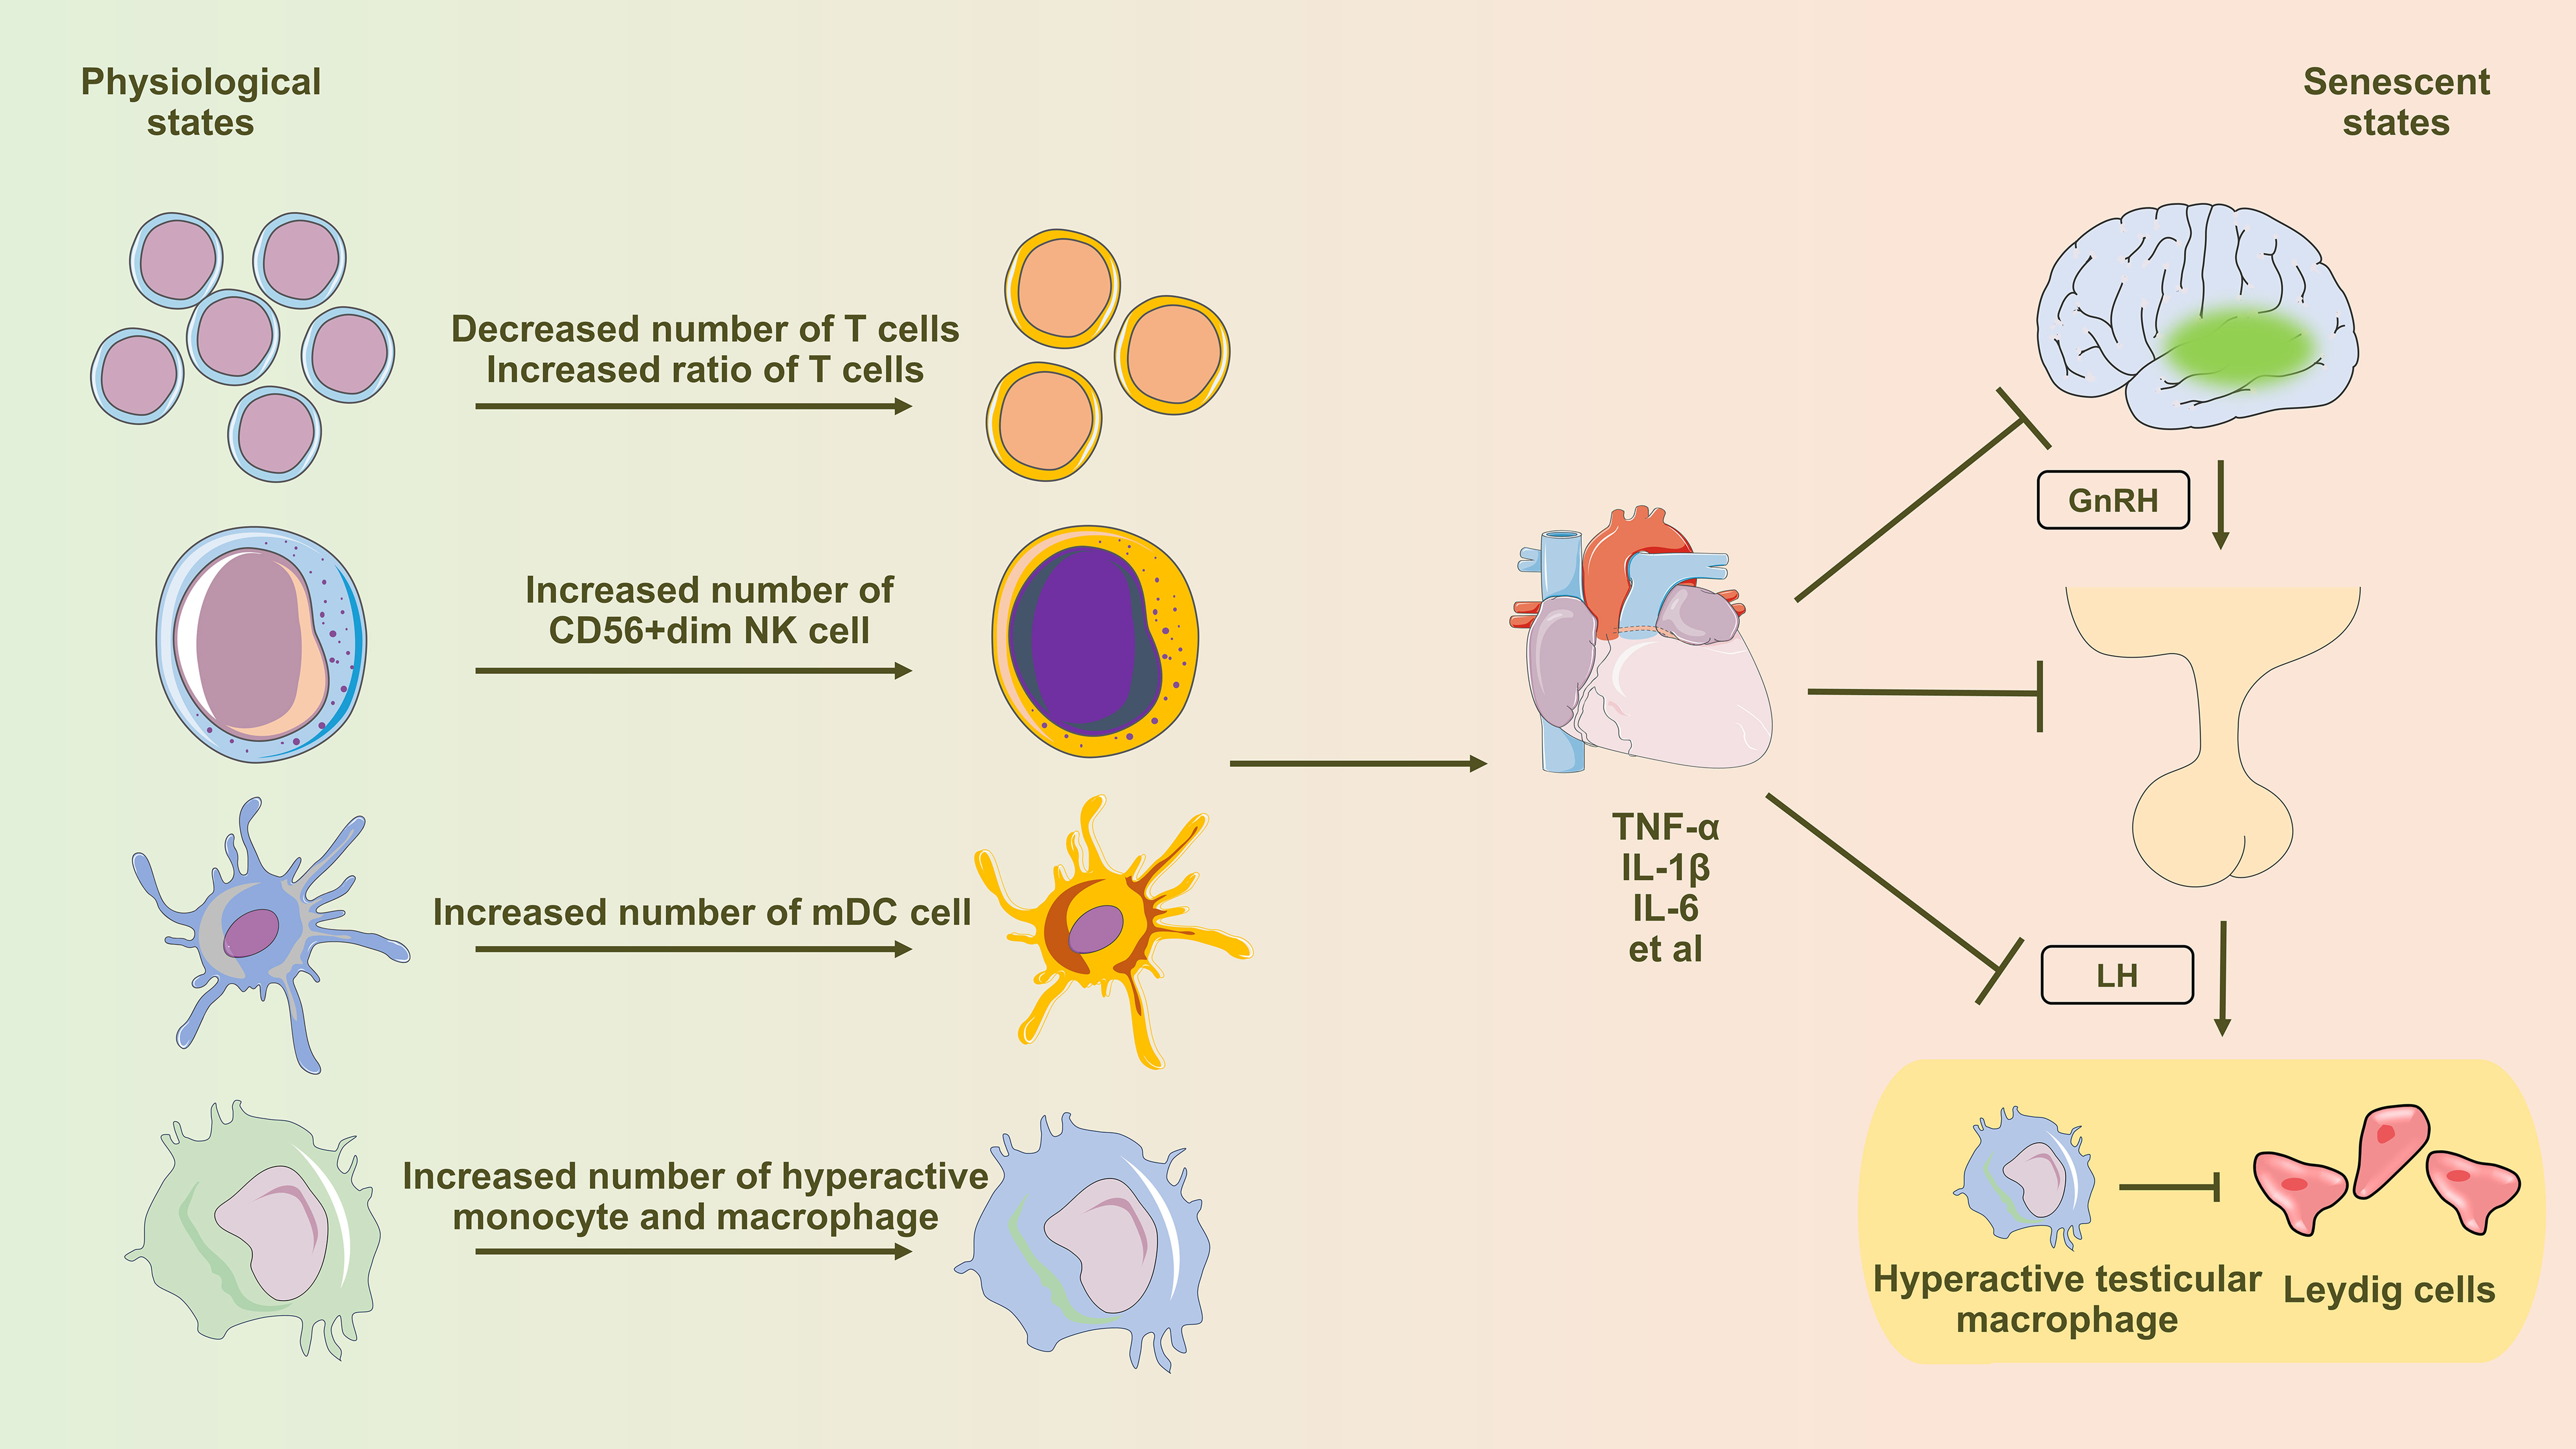 Frontiers | A narrative review on inflammaging and late-onset 